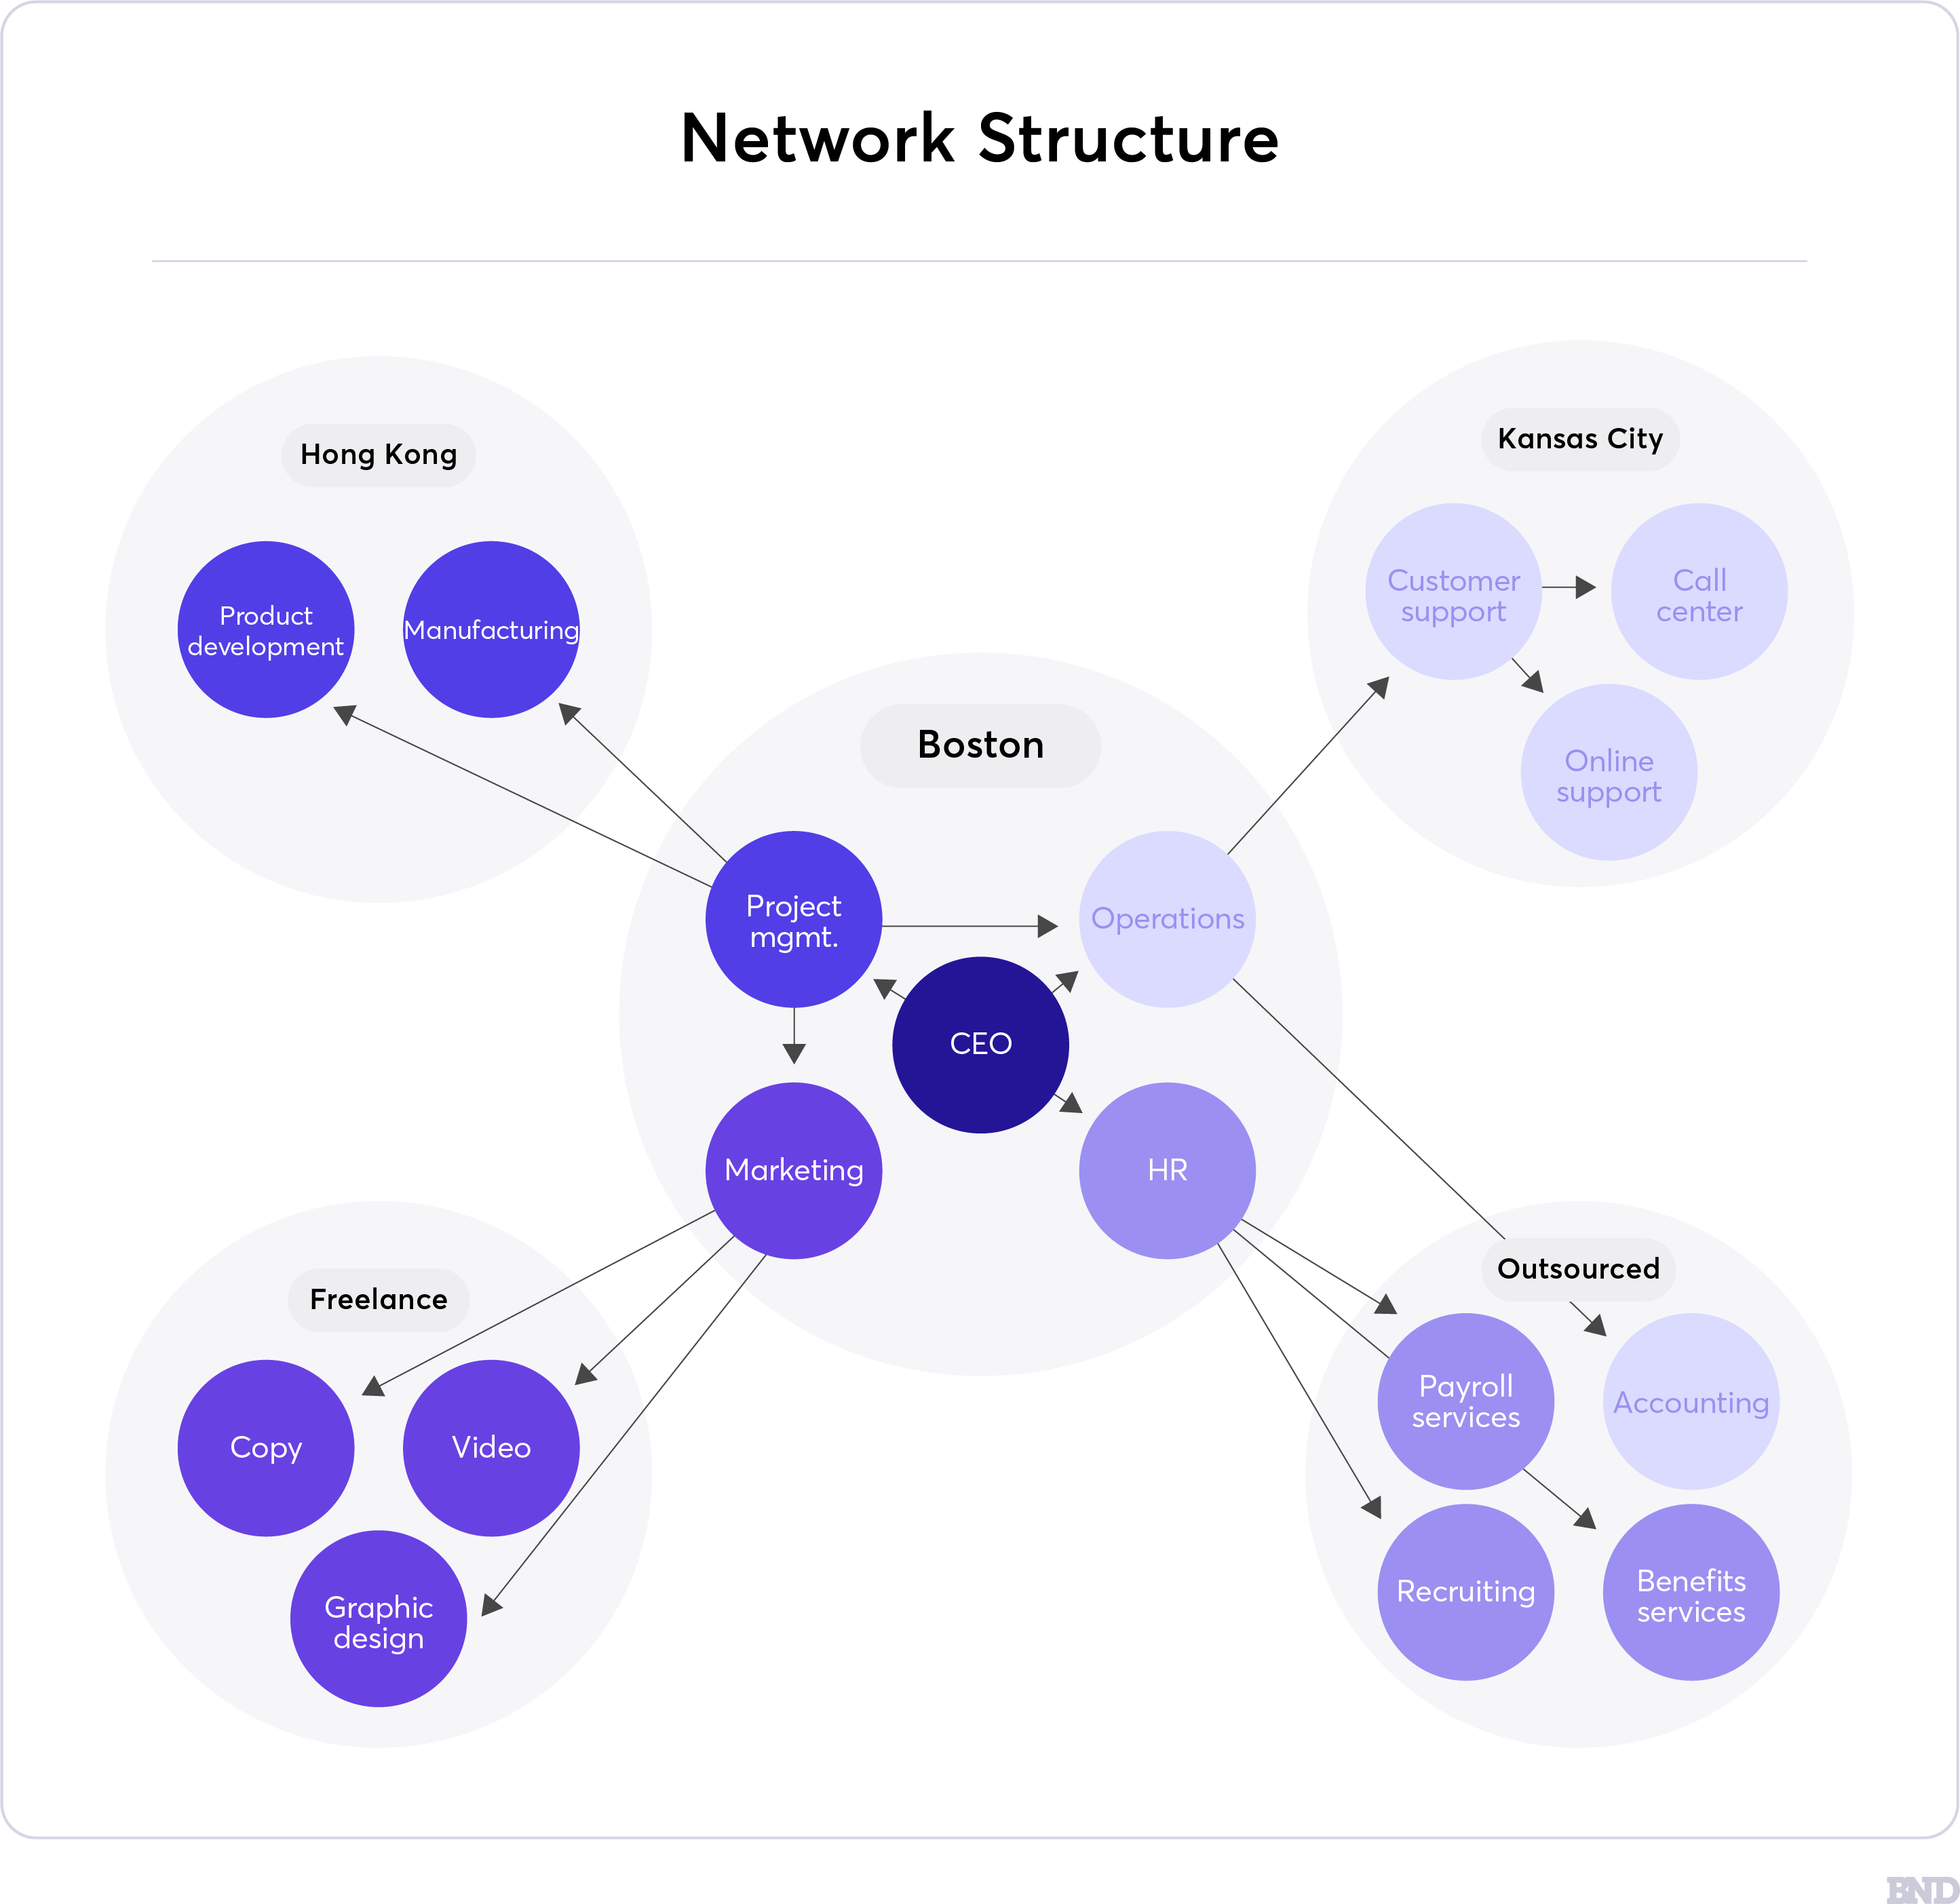 Network structure graphic